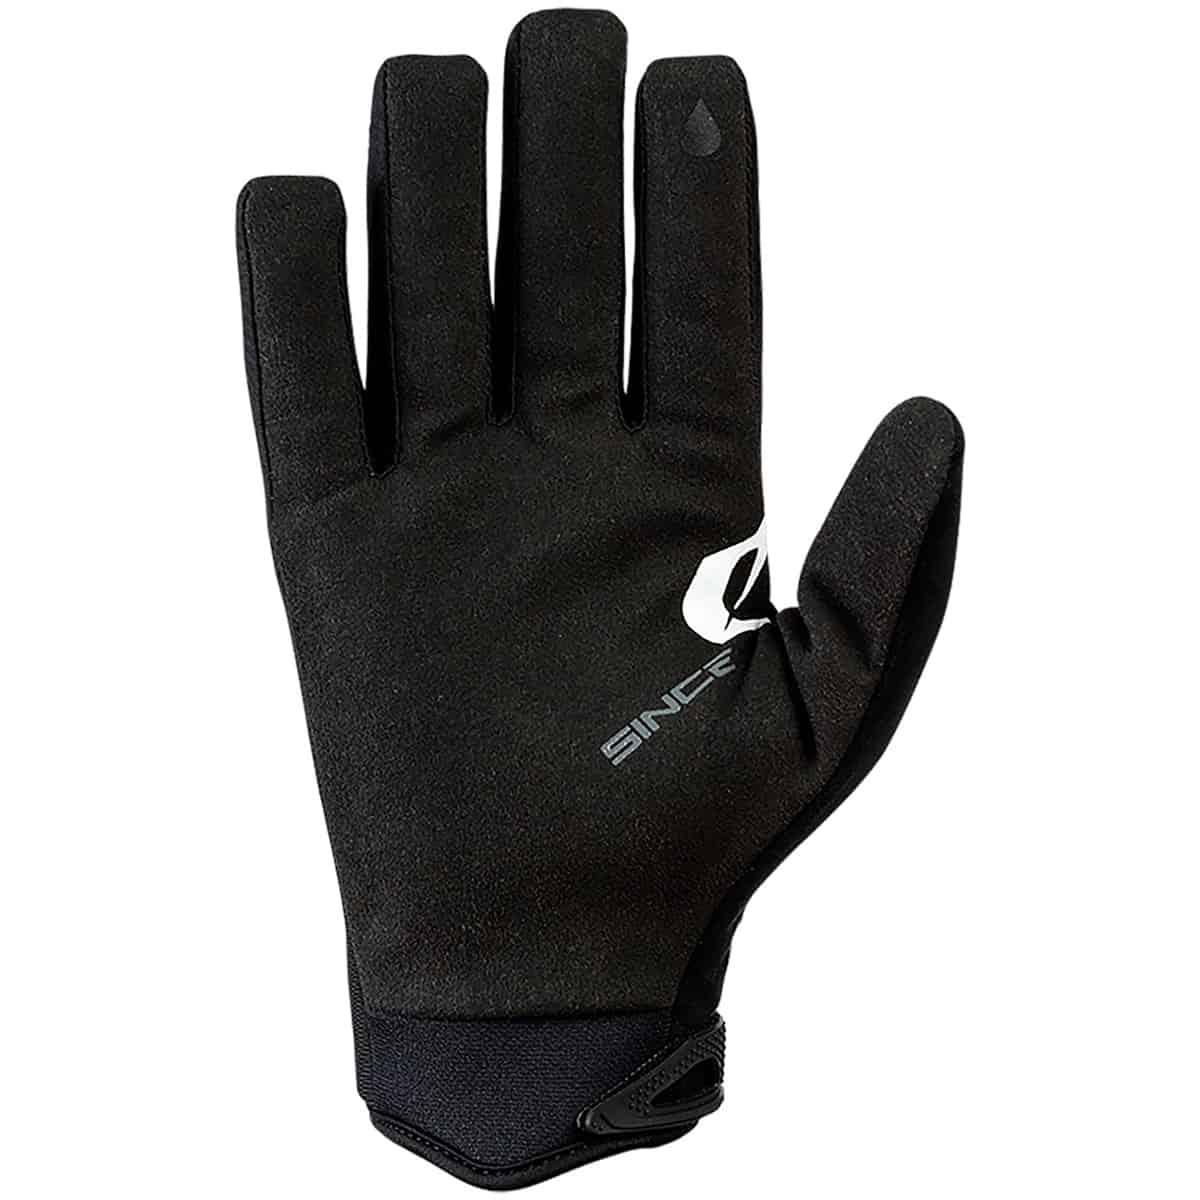 These gloves will keep your hands warmer than traditional off road gloves thanks to the softshell material.-2